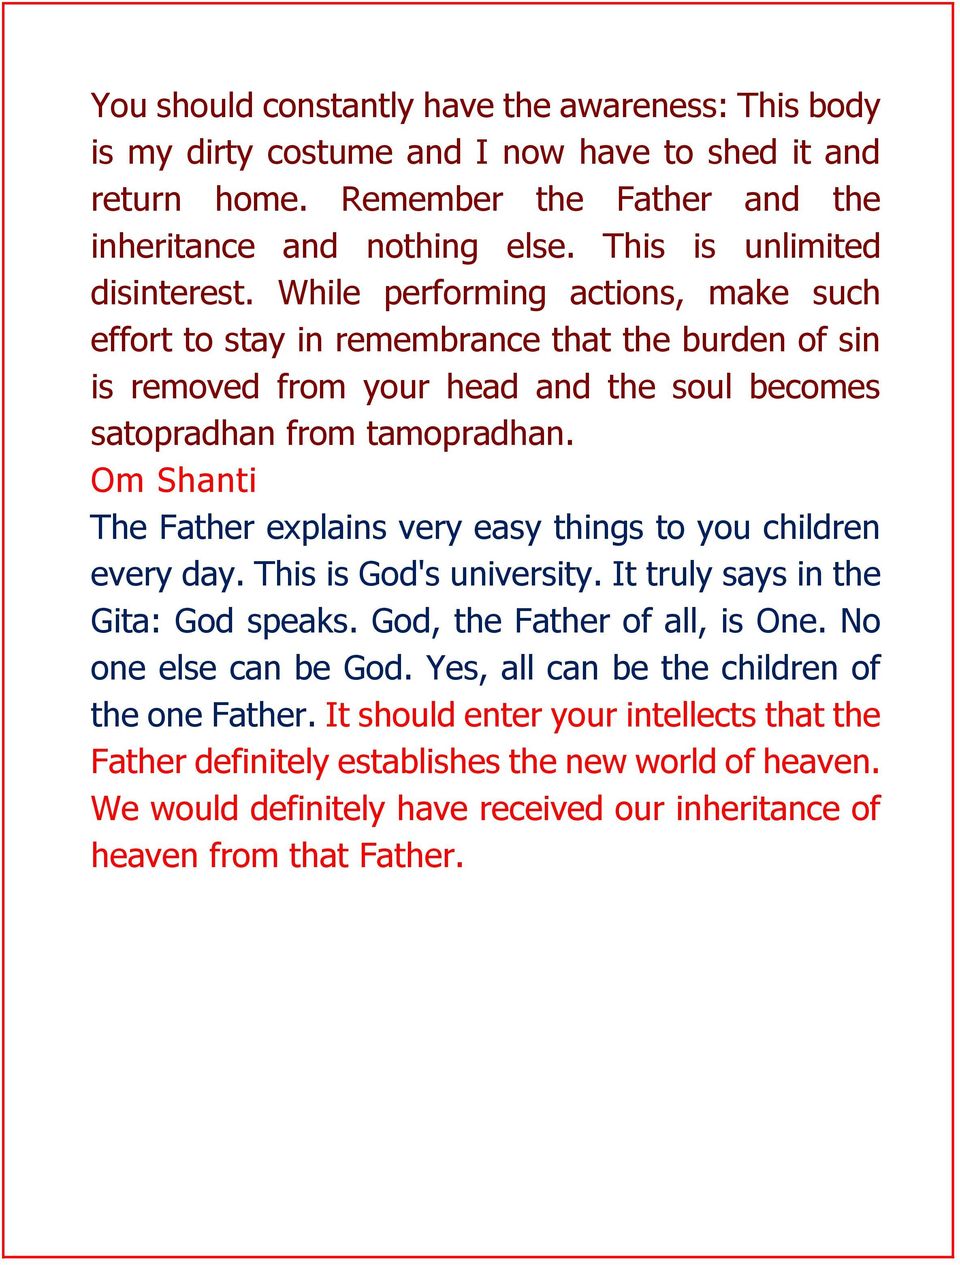 Om Shanti The Father explains very easy things to you children every day. This is God's university. It truly says in the Gita: God speaks. God, the Father of all, is One. No one else can be God.